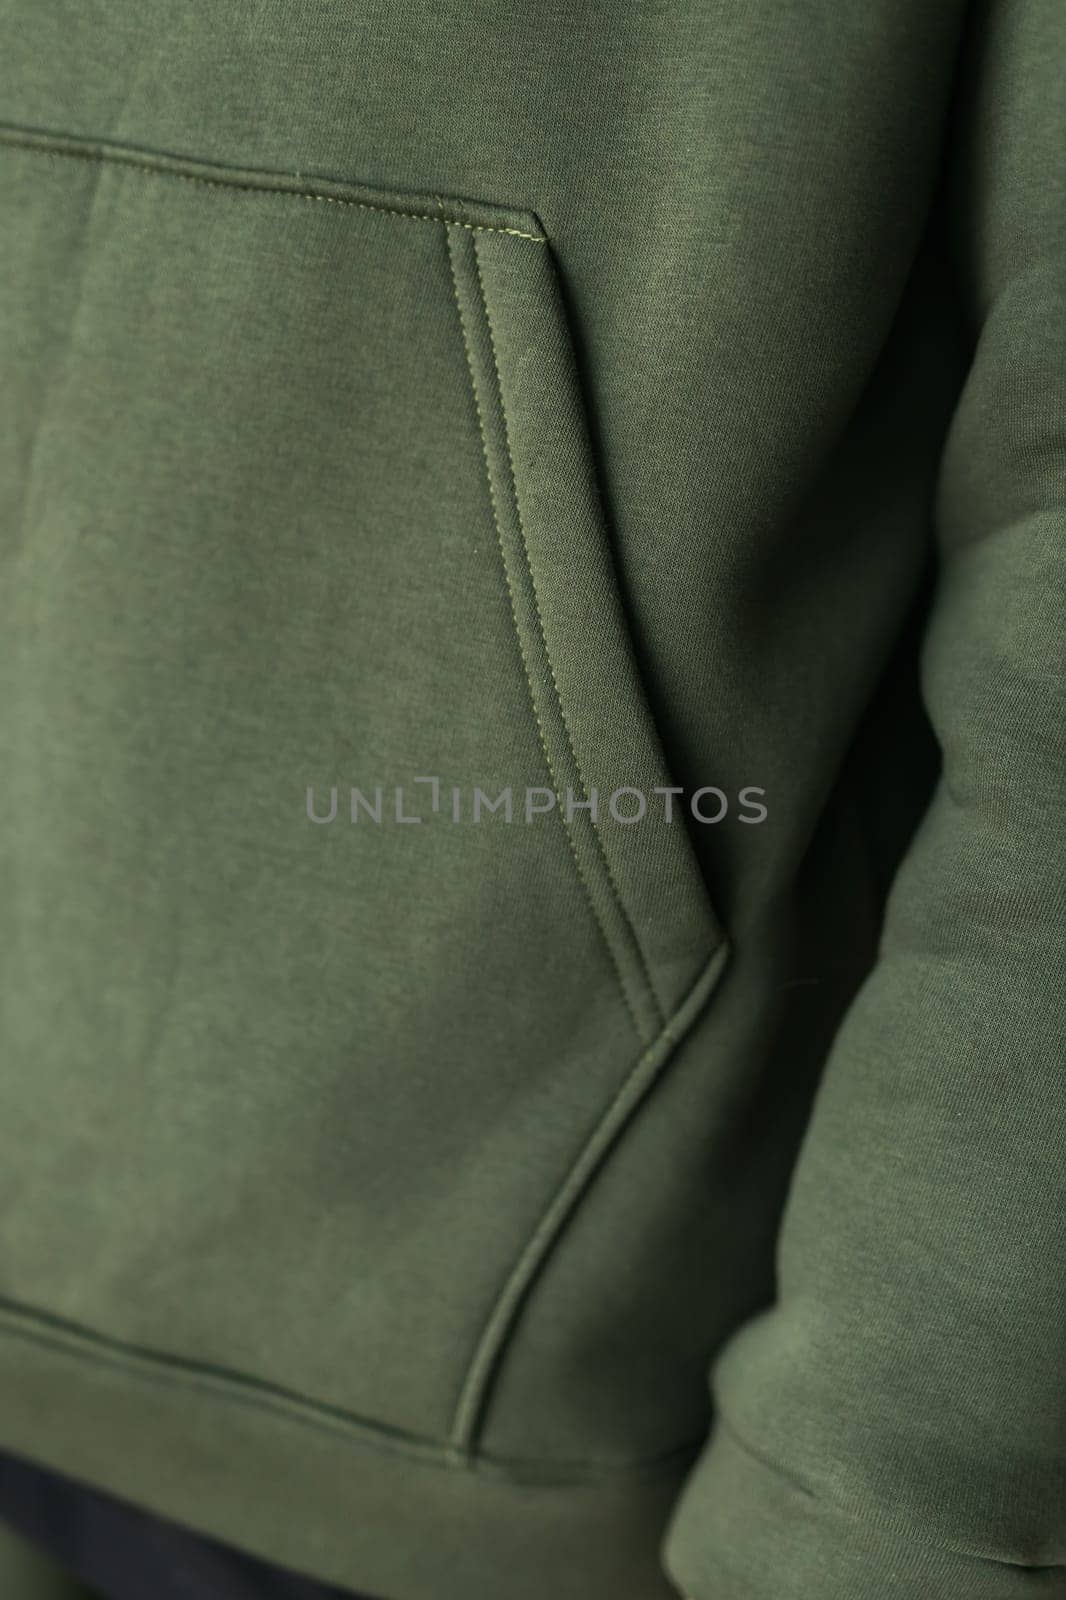 Close up of detail sweatshirt or hoodie - fabric and tailoring clothes design concept by Satura86